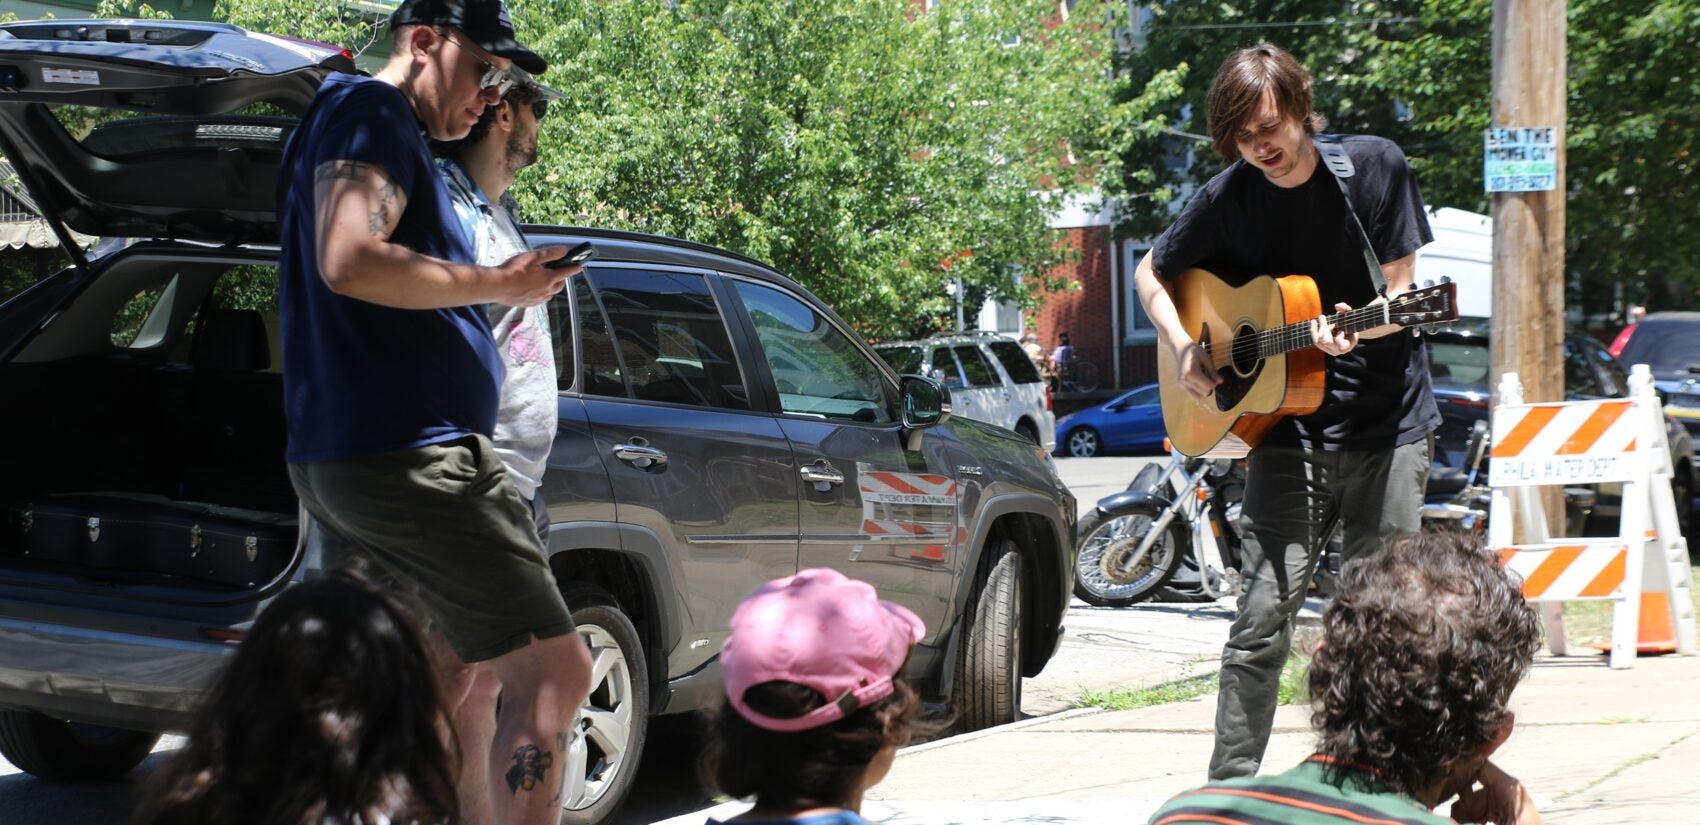 Porchfest attendees watch someone play guitar